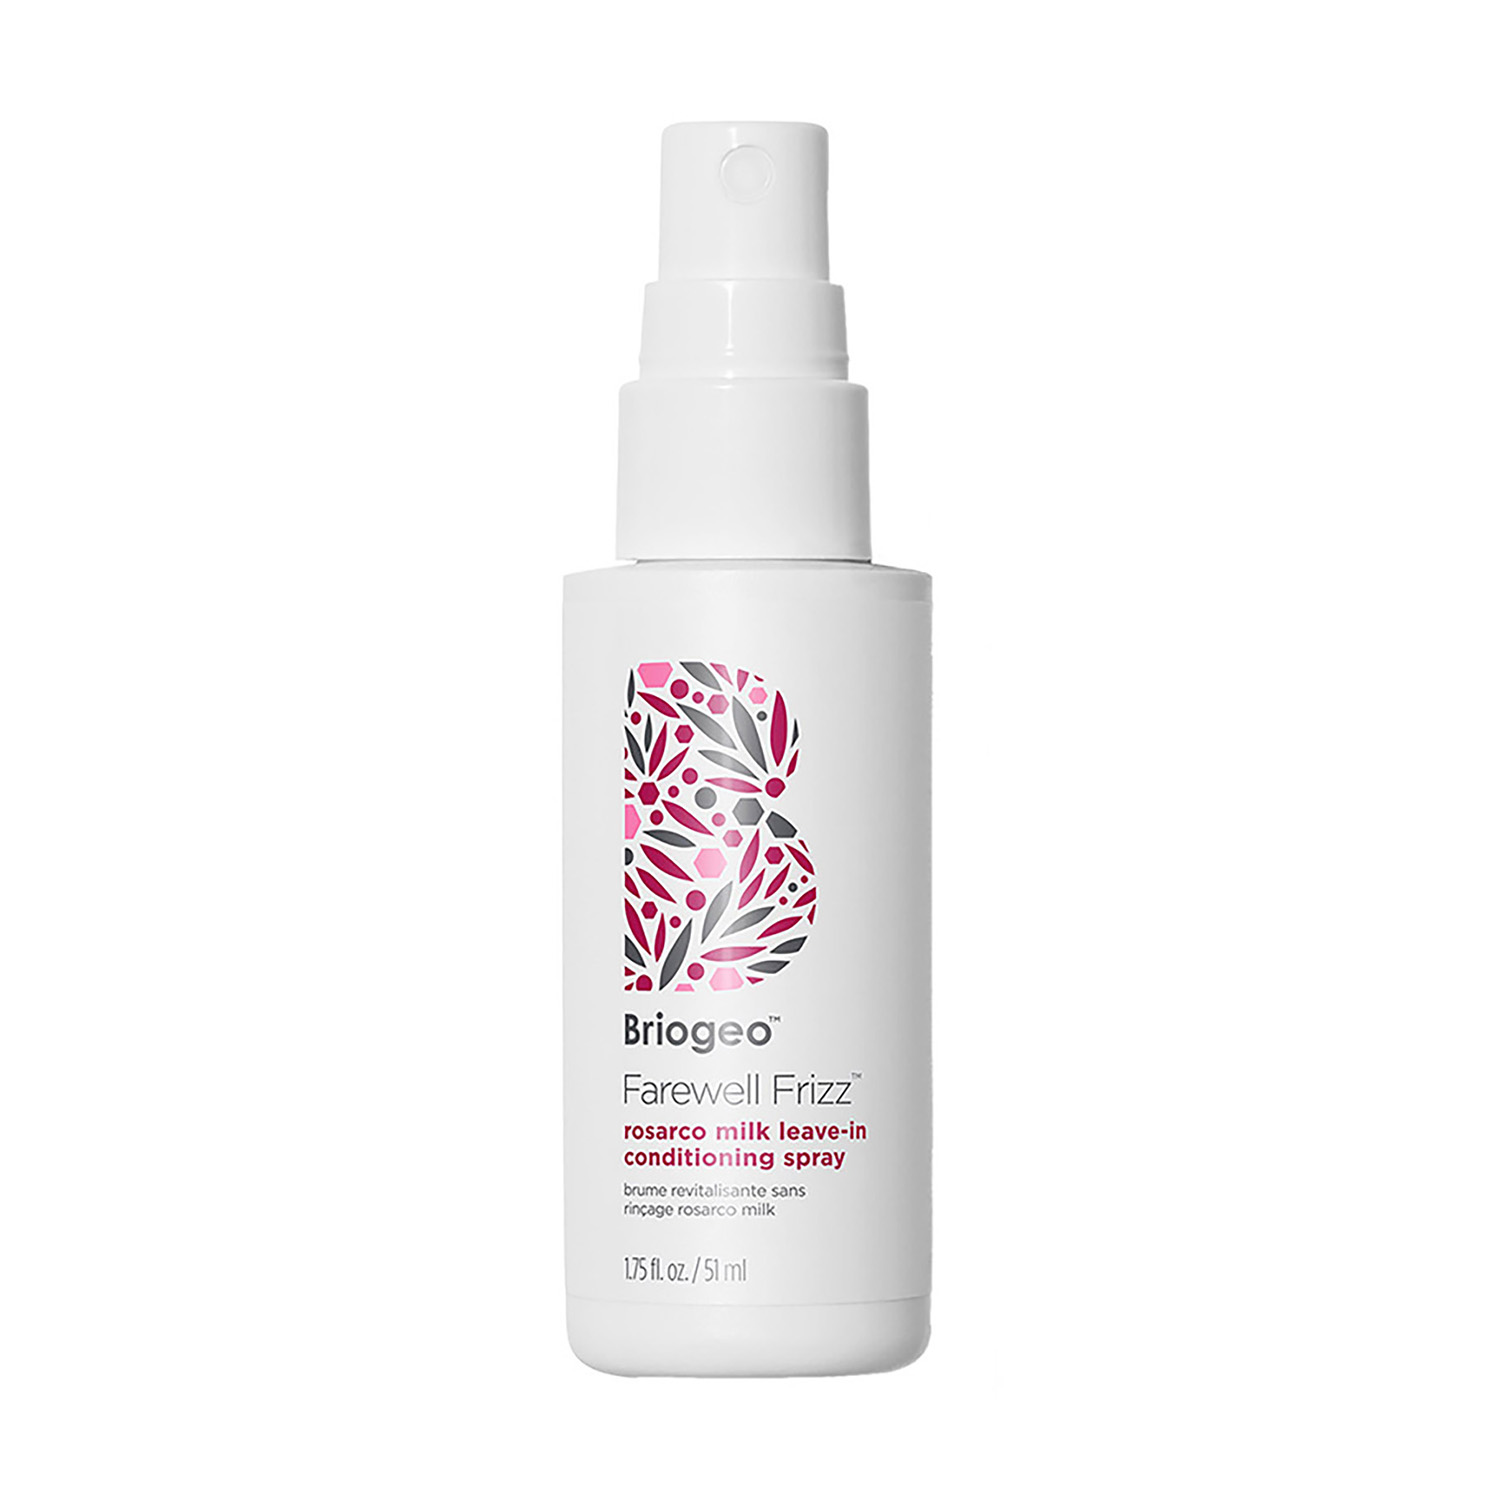 FAREWELL FRIZZ™ ROSARCO MILK LEAVE-IN CONDITIONING SPRAY